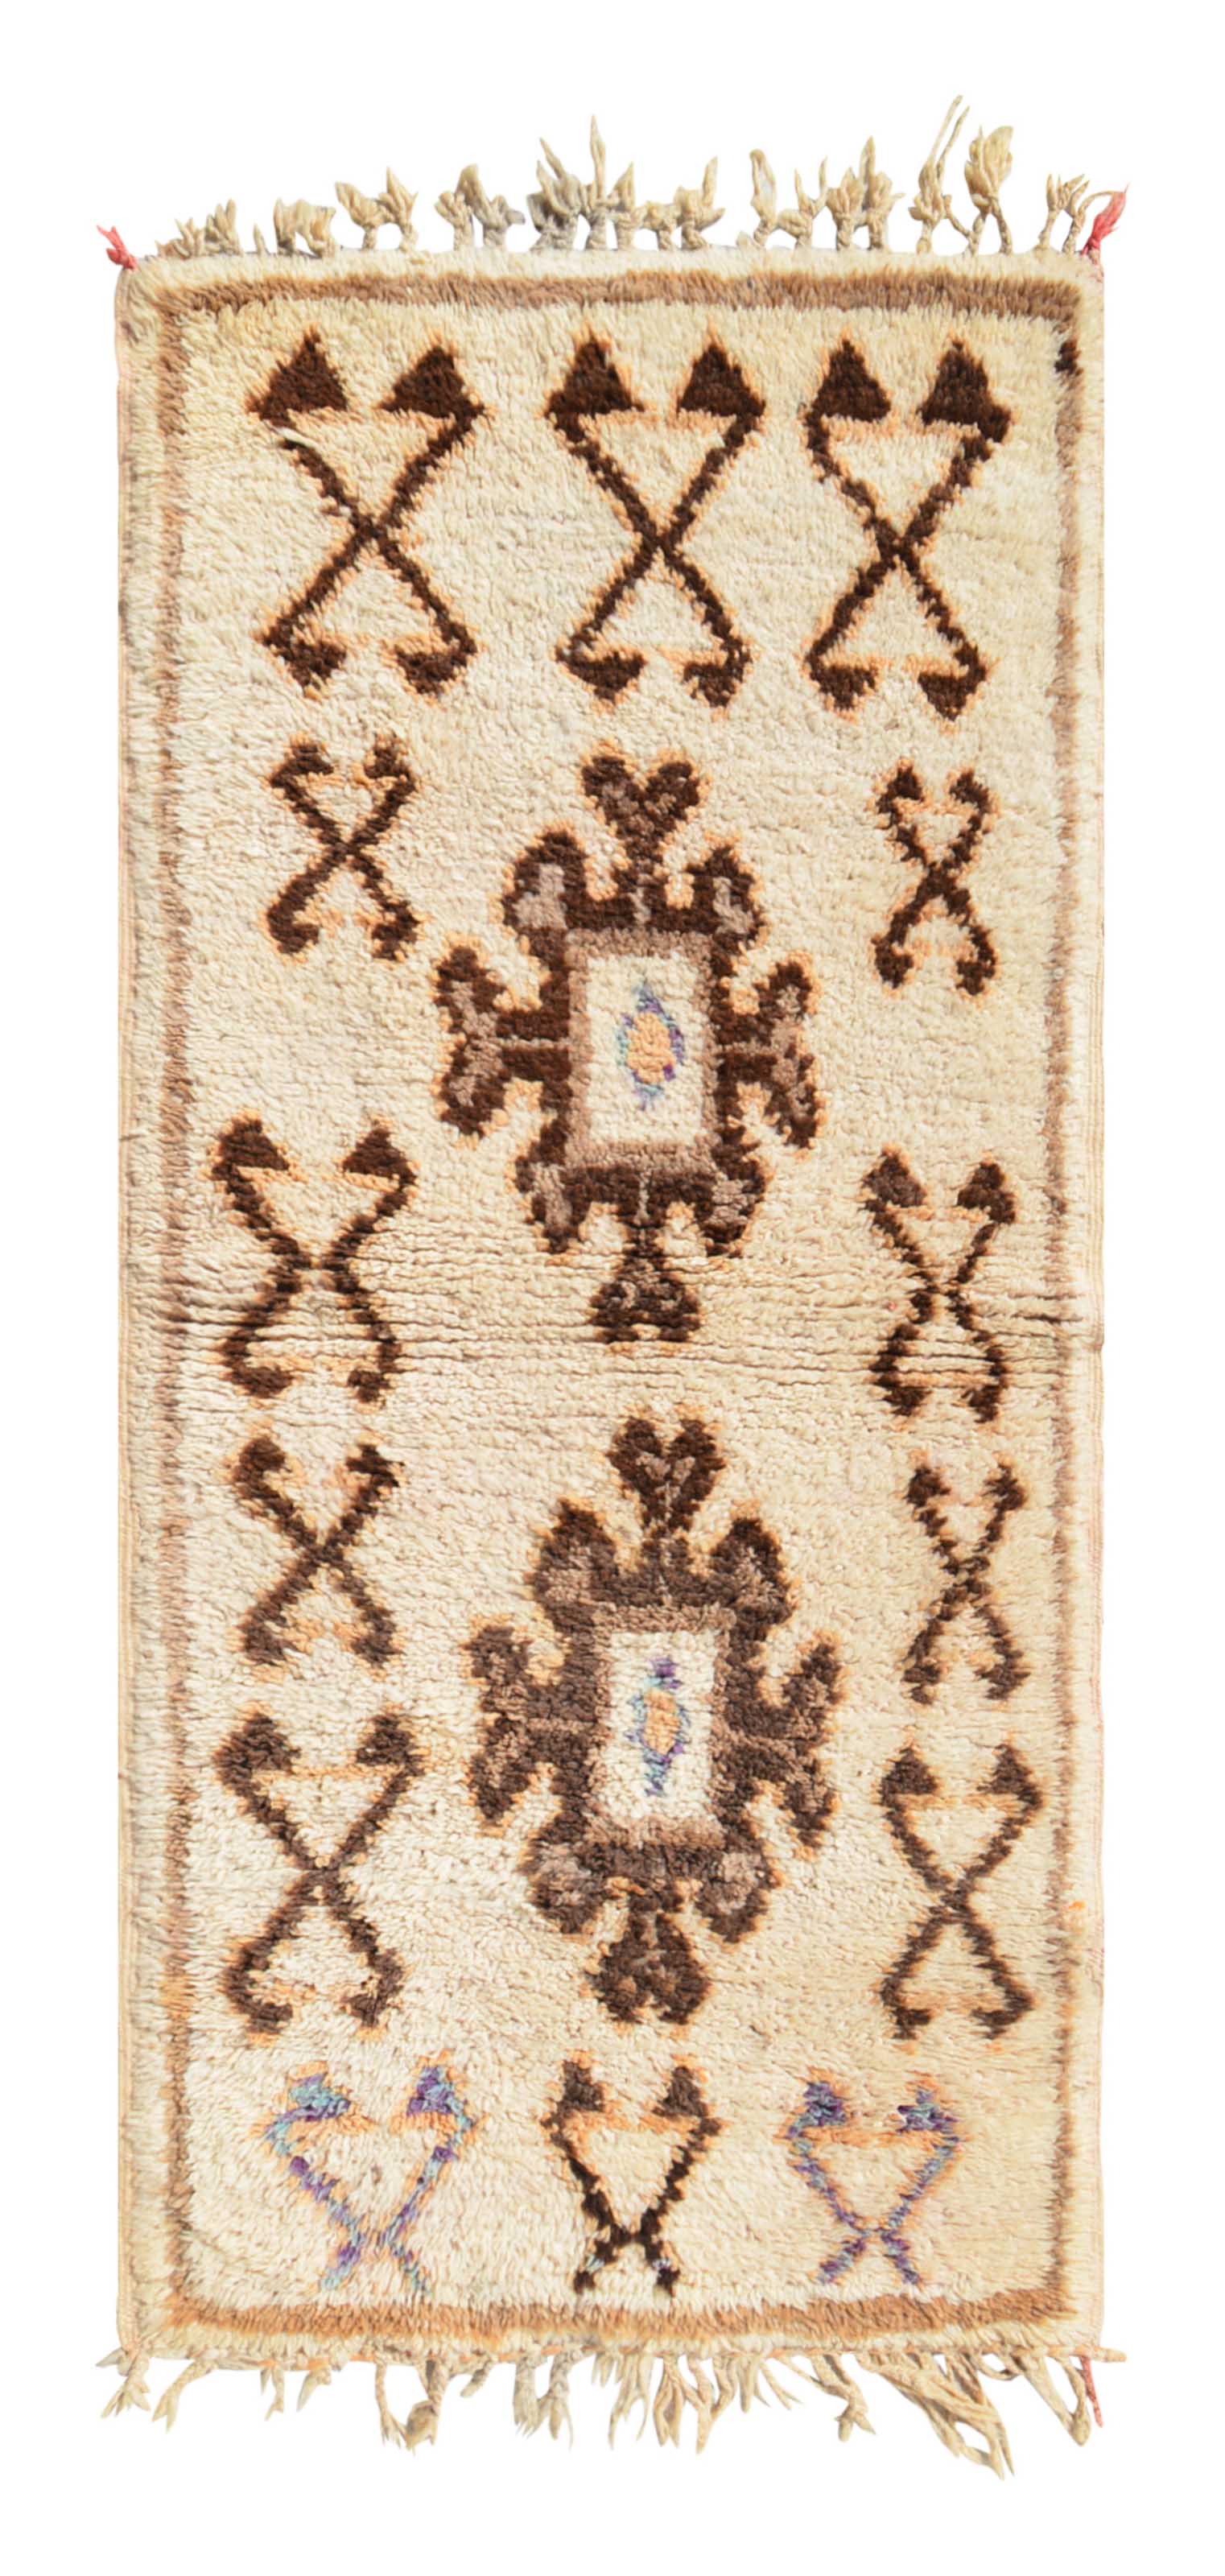 Vintage Moroccan Rug Vintage Southwestern Rugs | Moroccan Rug Small Size 1 | Illuminate Collective illuminate collective 